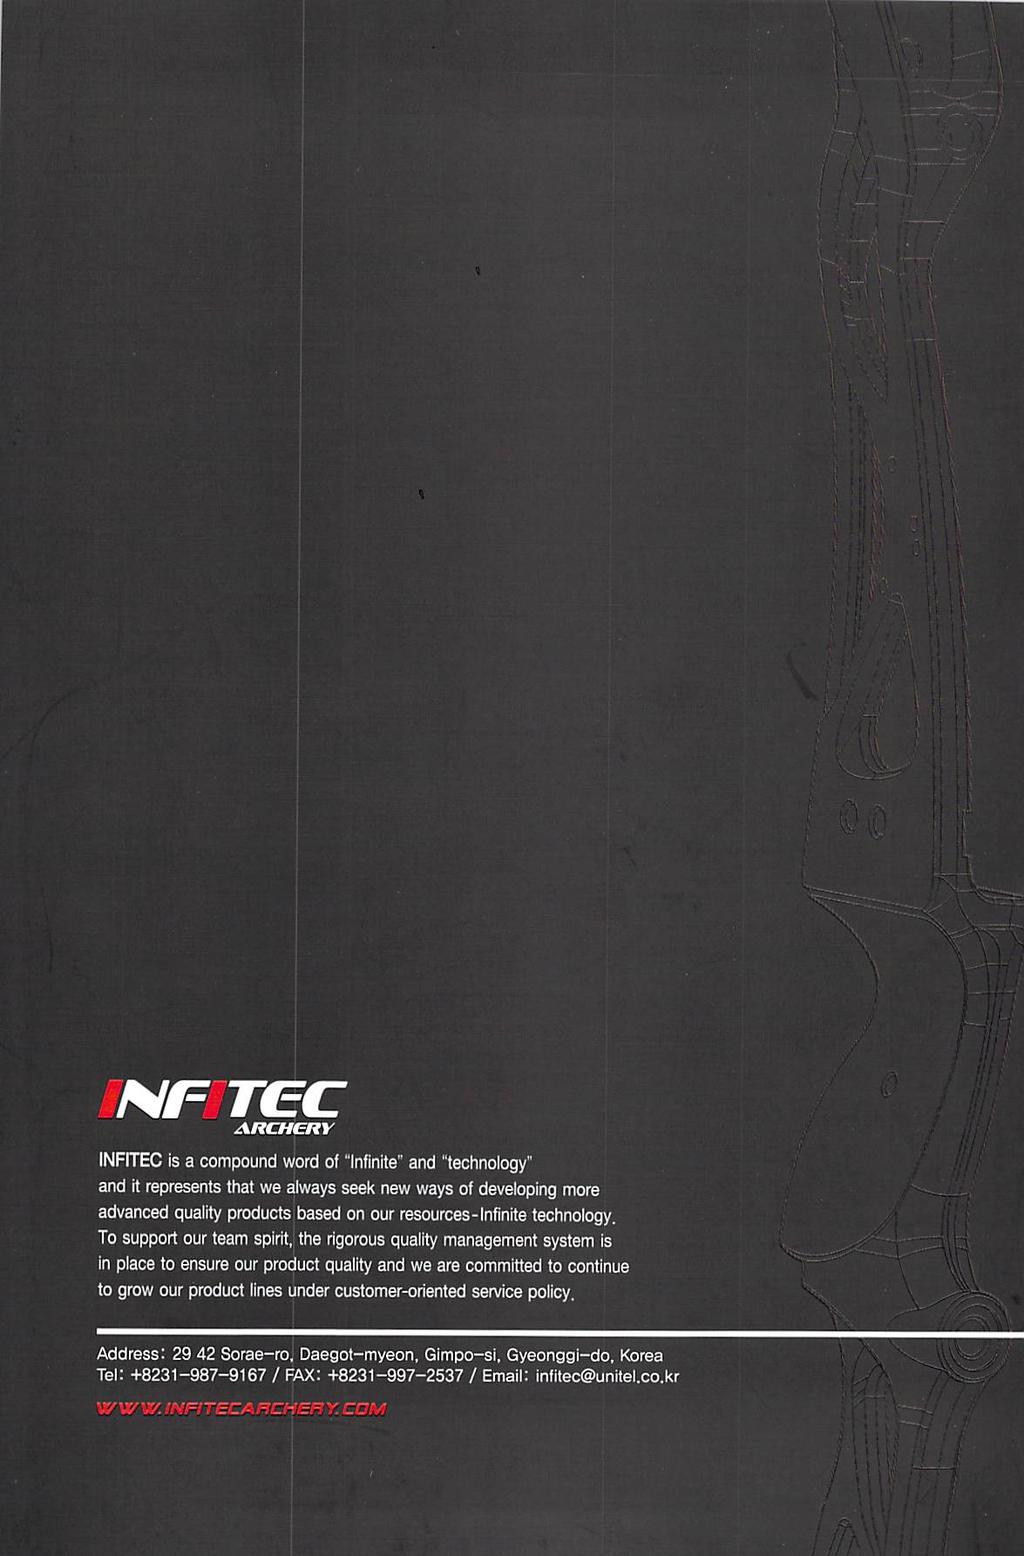 JNF ARCHERY INFITEC is a compound word of "Infinite" and "technology" and it represents that we always seek new ways of developing more advanced quality products based on our resources-infinite